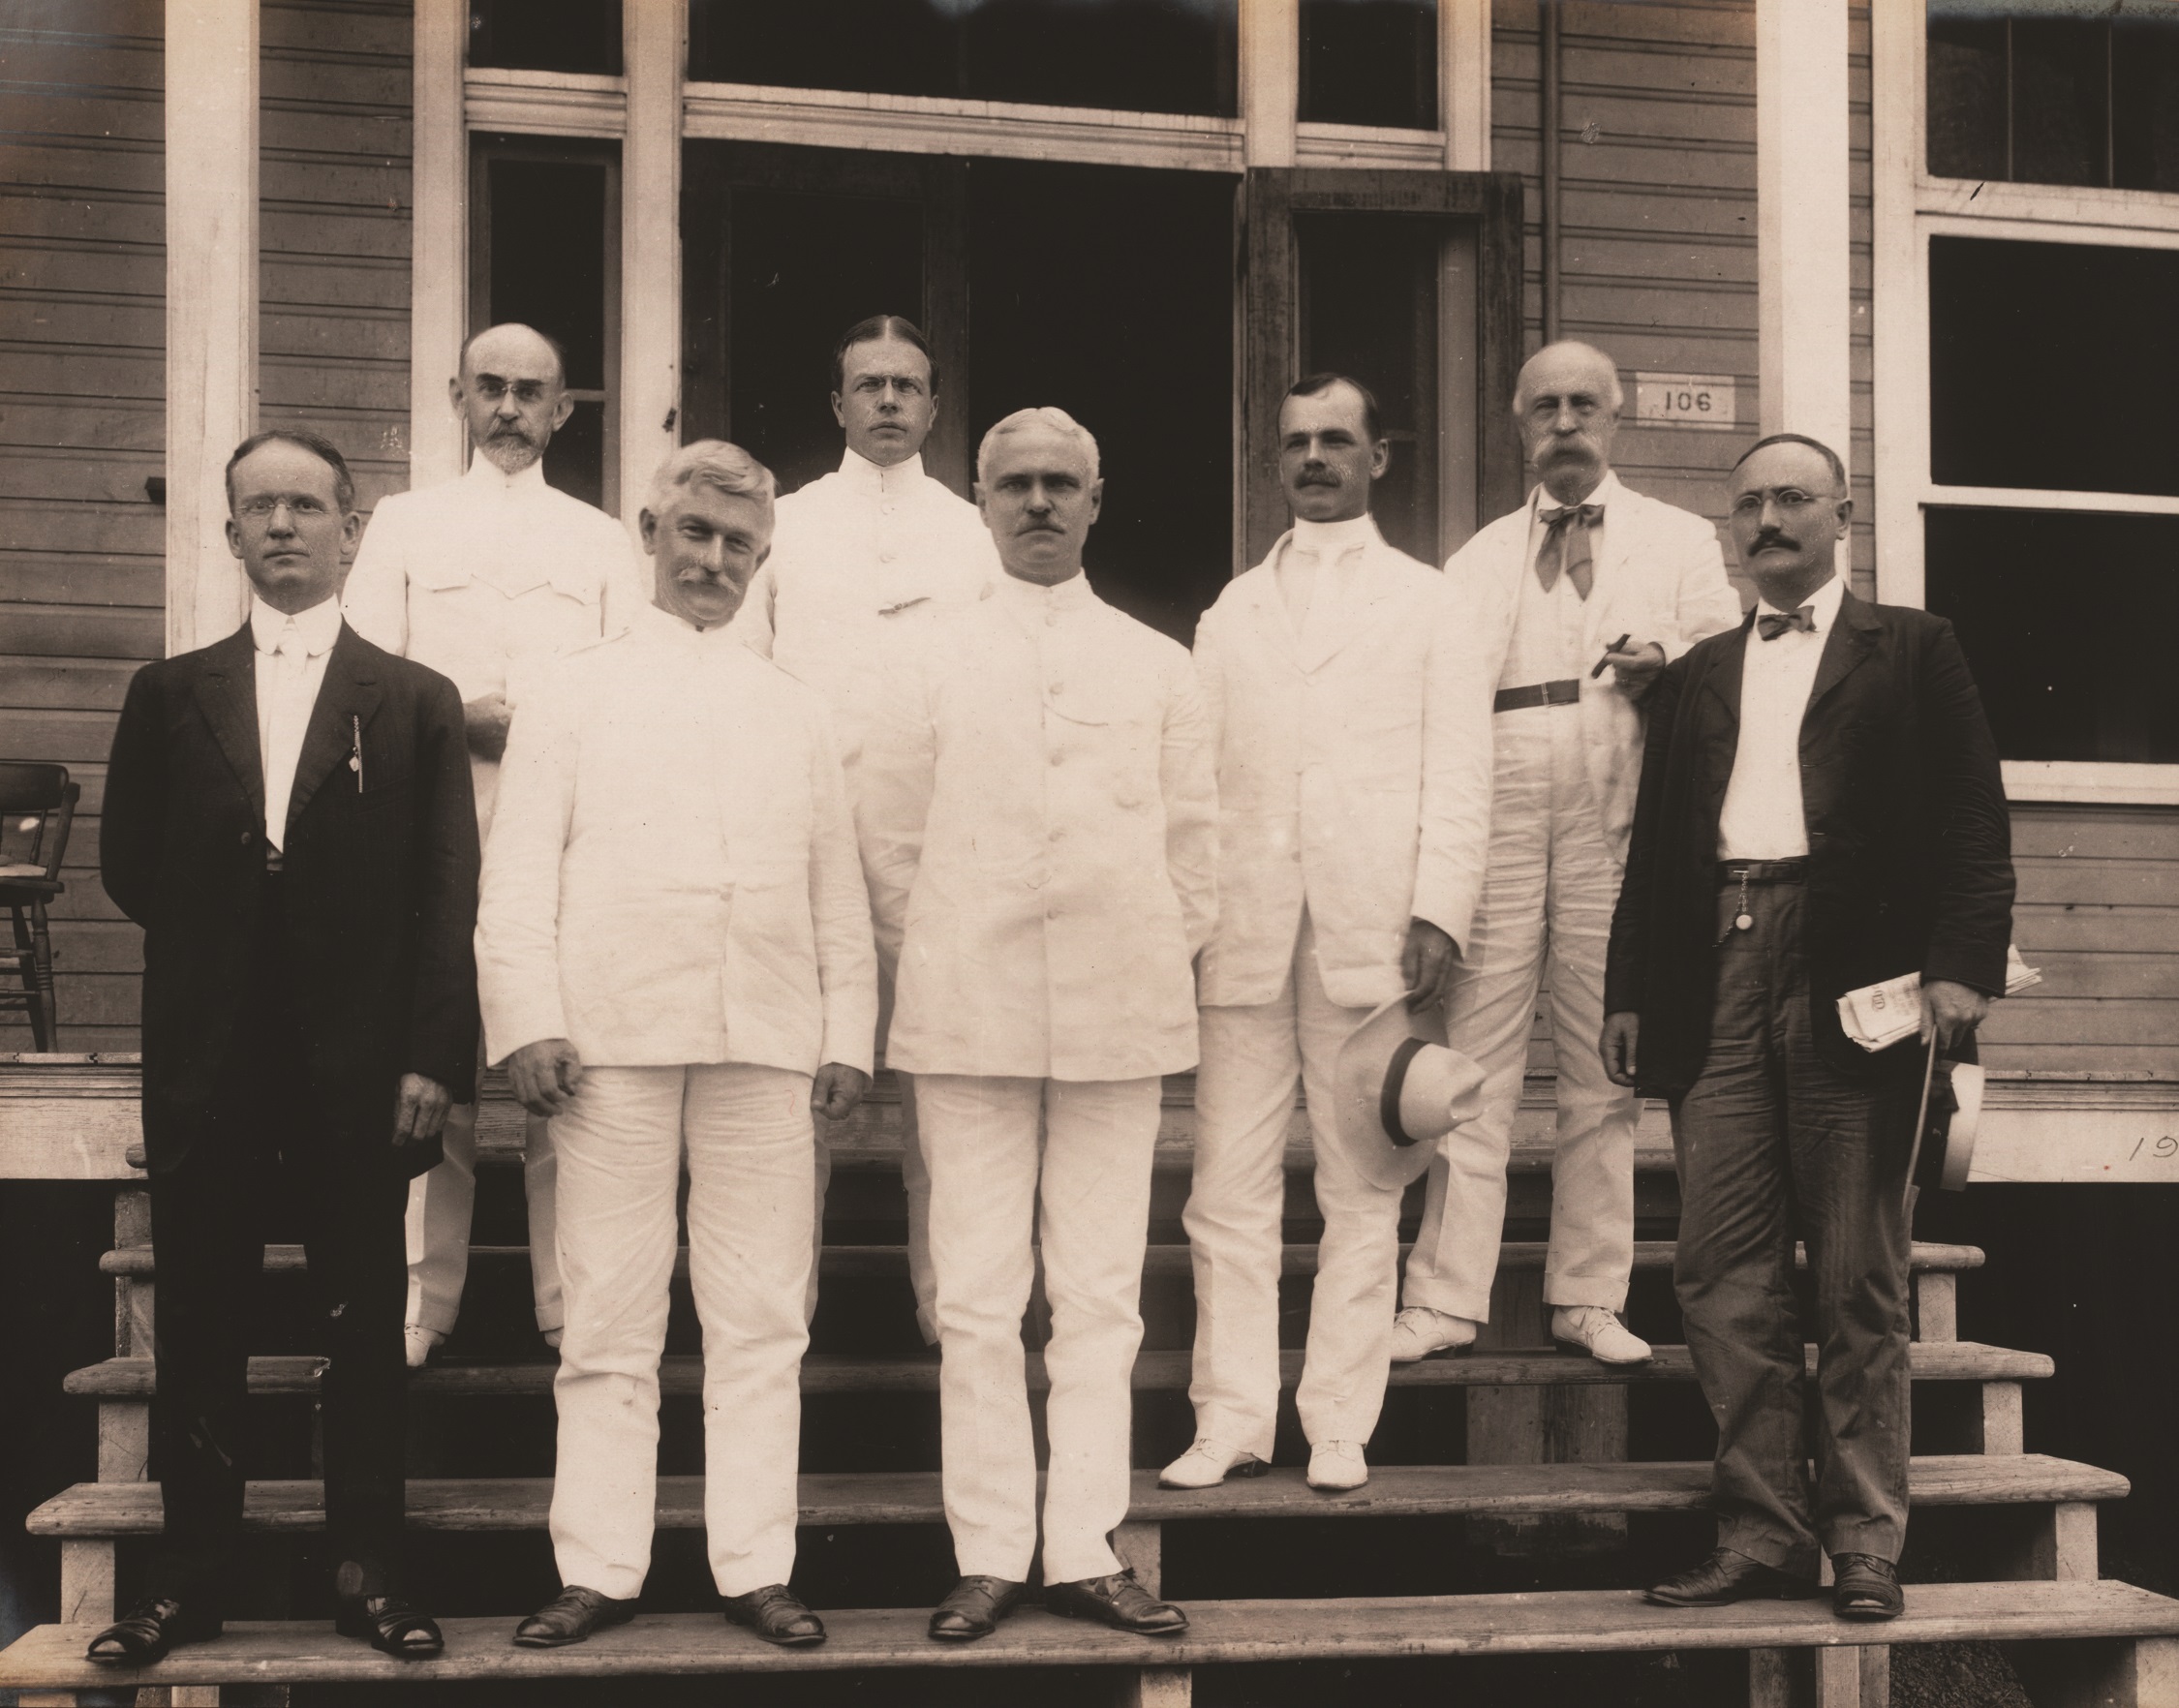 The personnel of the third Isthmian Canal Commission, 1907, including General Goethals in the center of the front row.